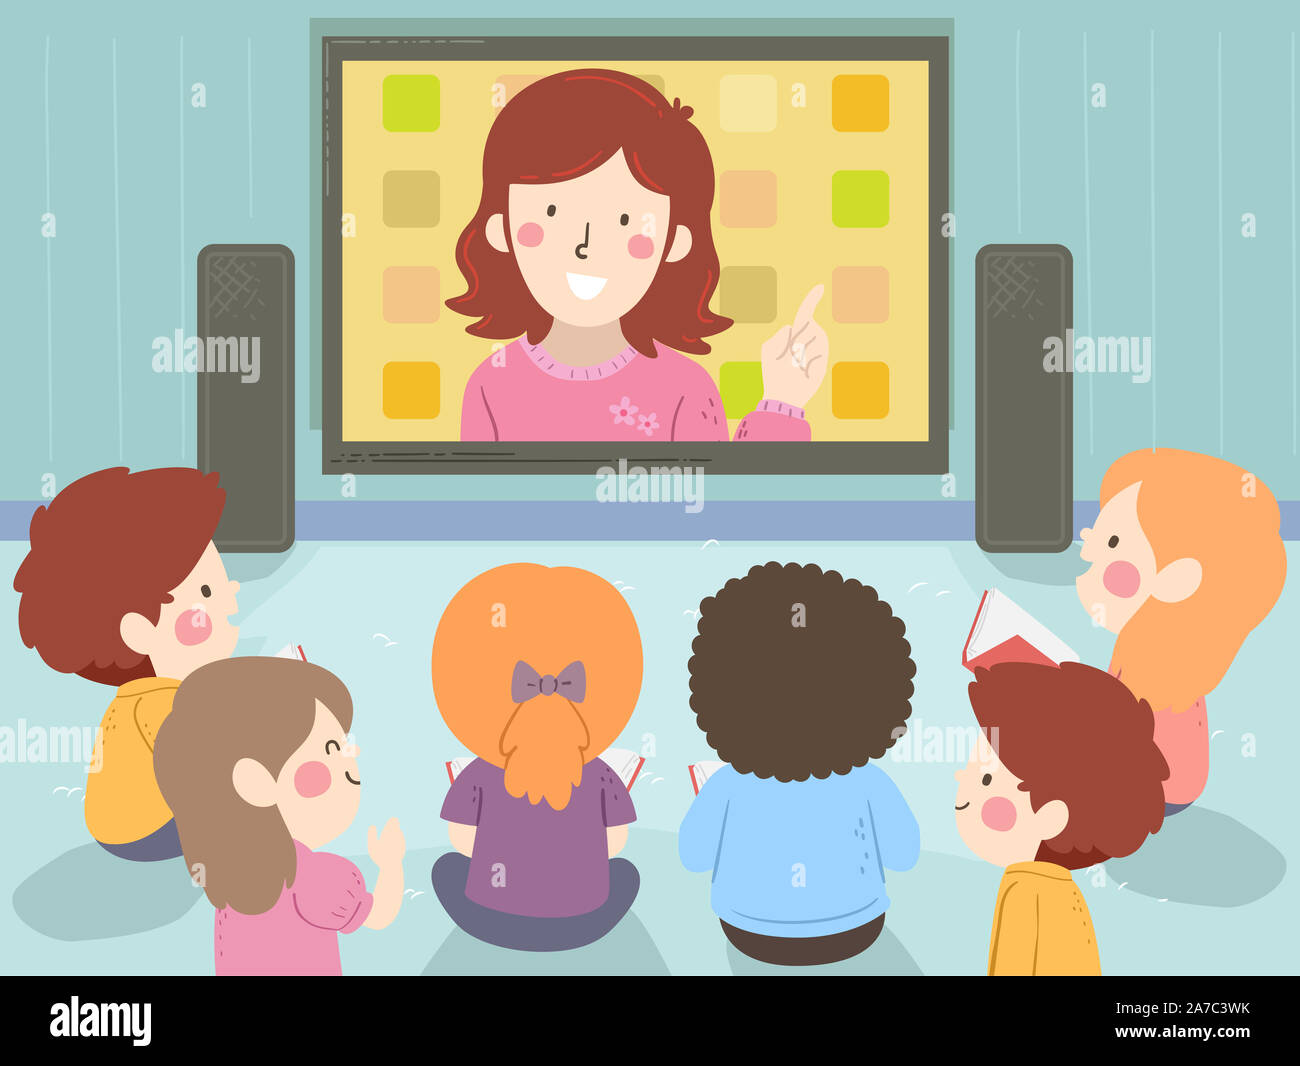 Illustration of Kids Sitting Down Watching the Floor Their Teacher from a Big Television Screen Stock Photo